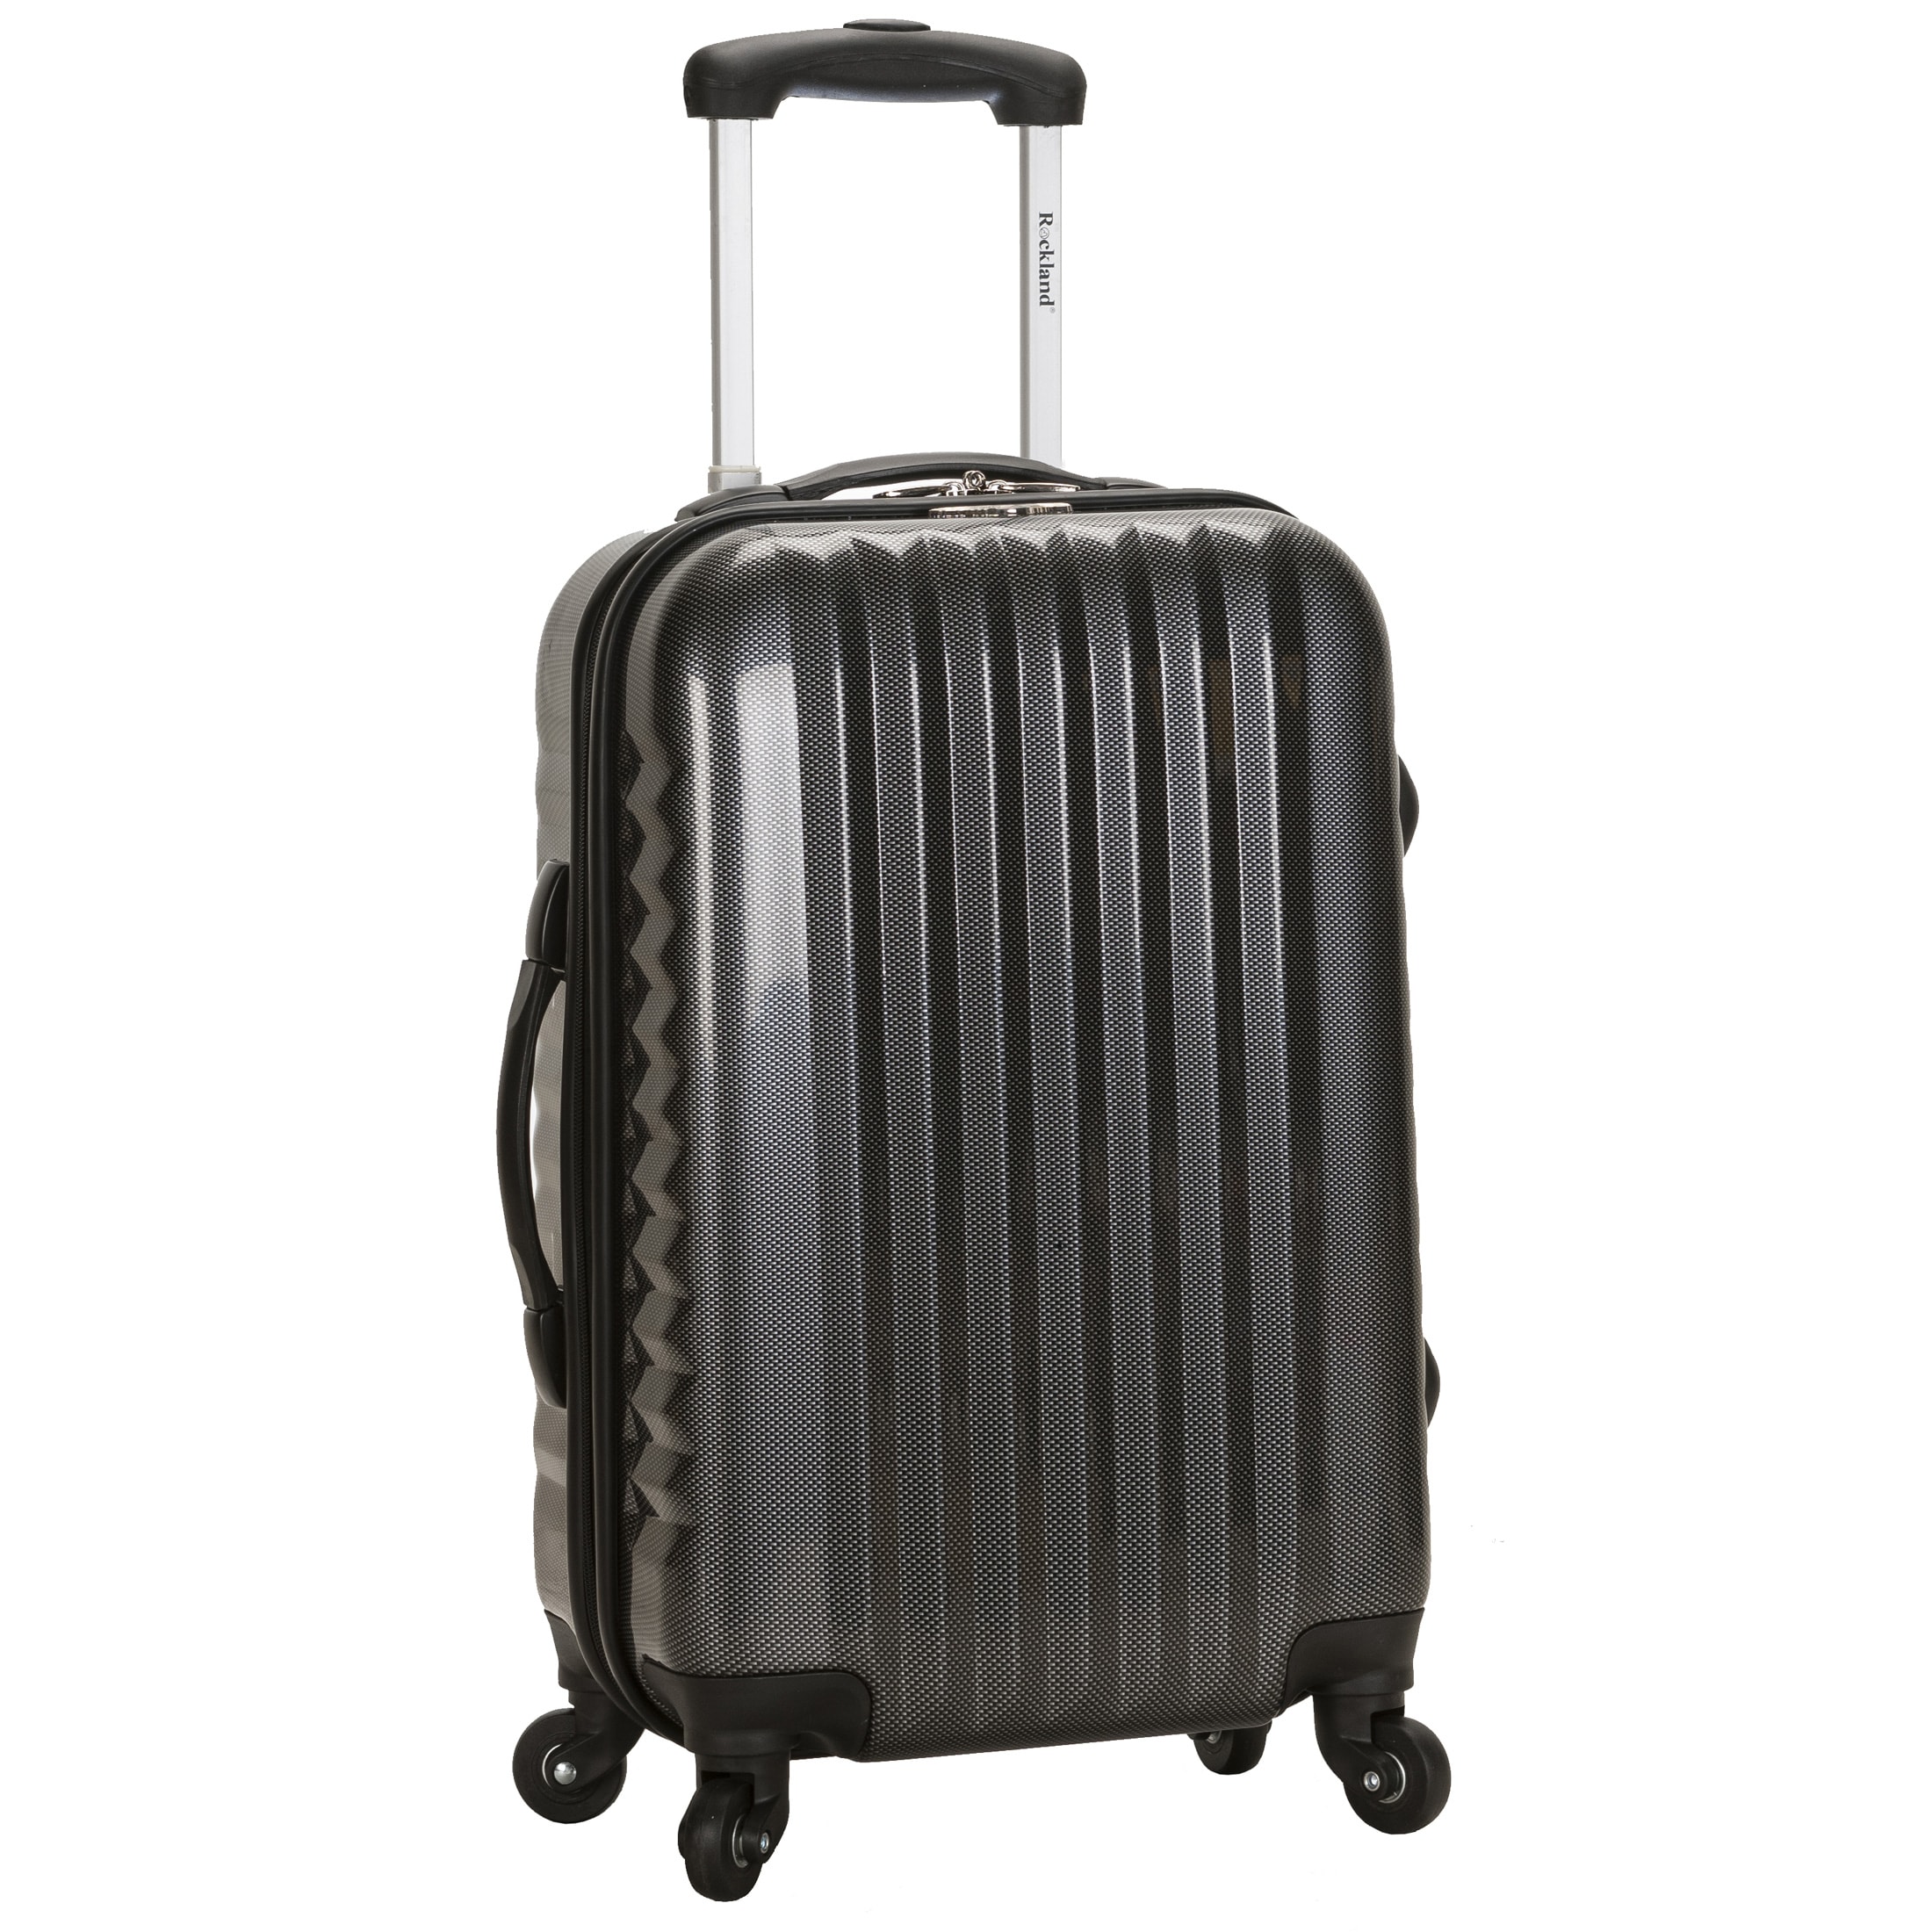 Rockland Carbon 20 inch Expandable Hardside Spinner Carry on Upright